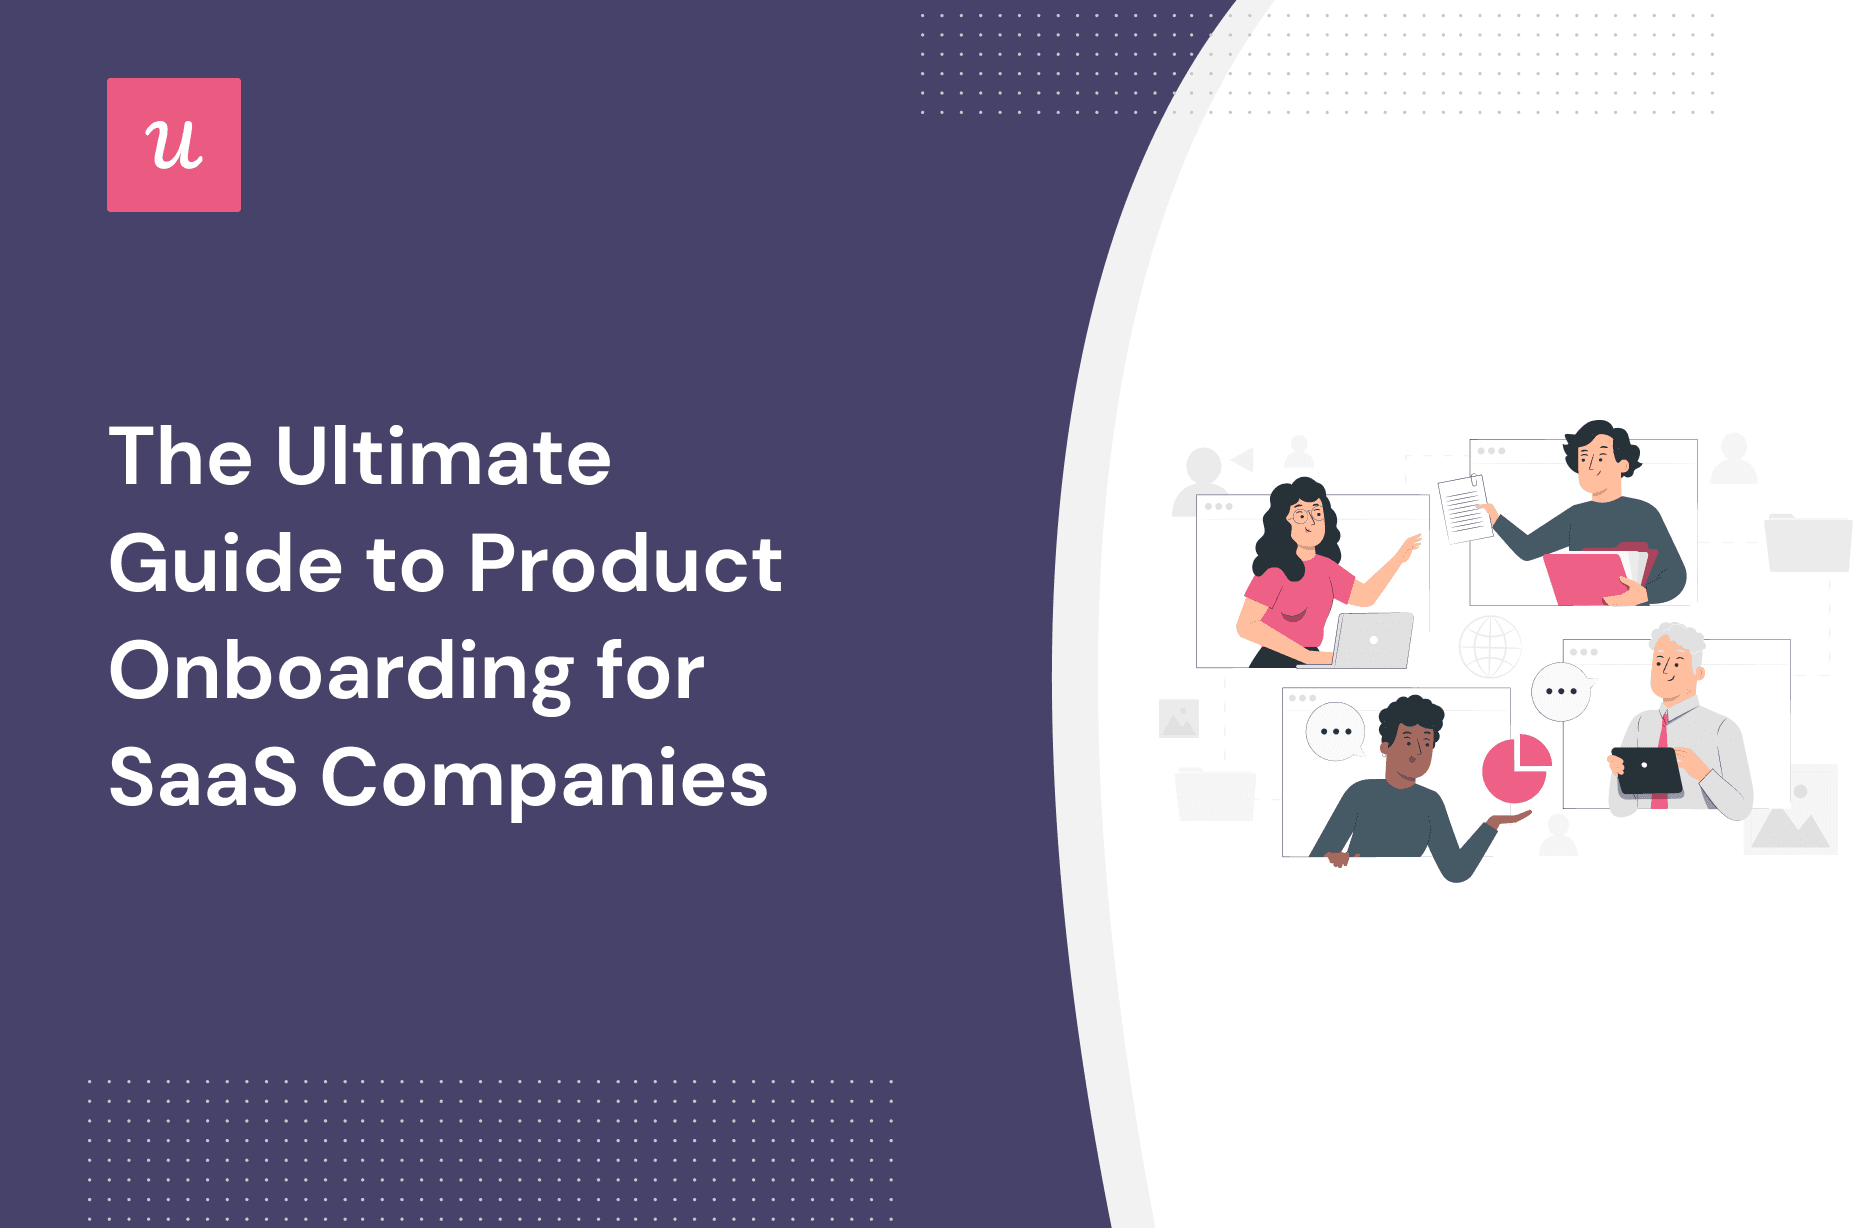 The Ultimate Guide to Product Onboarding for SaaS Companies cover